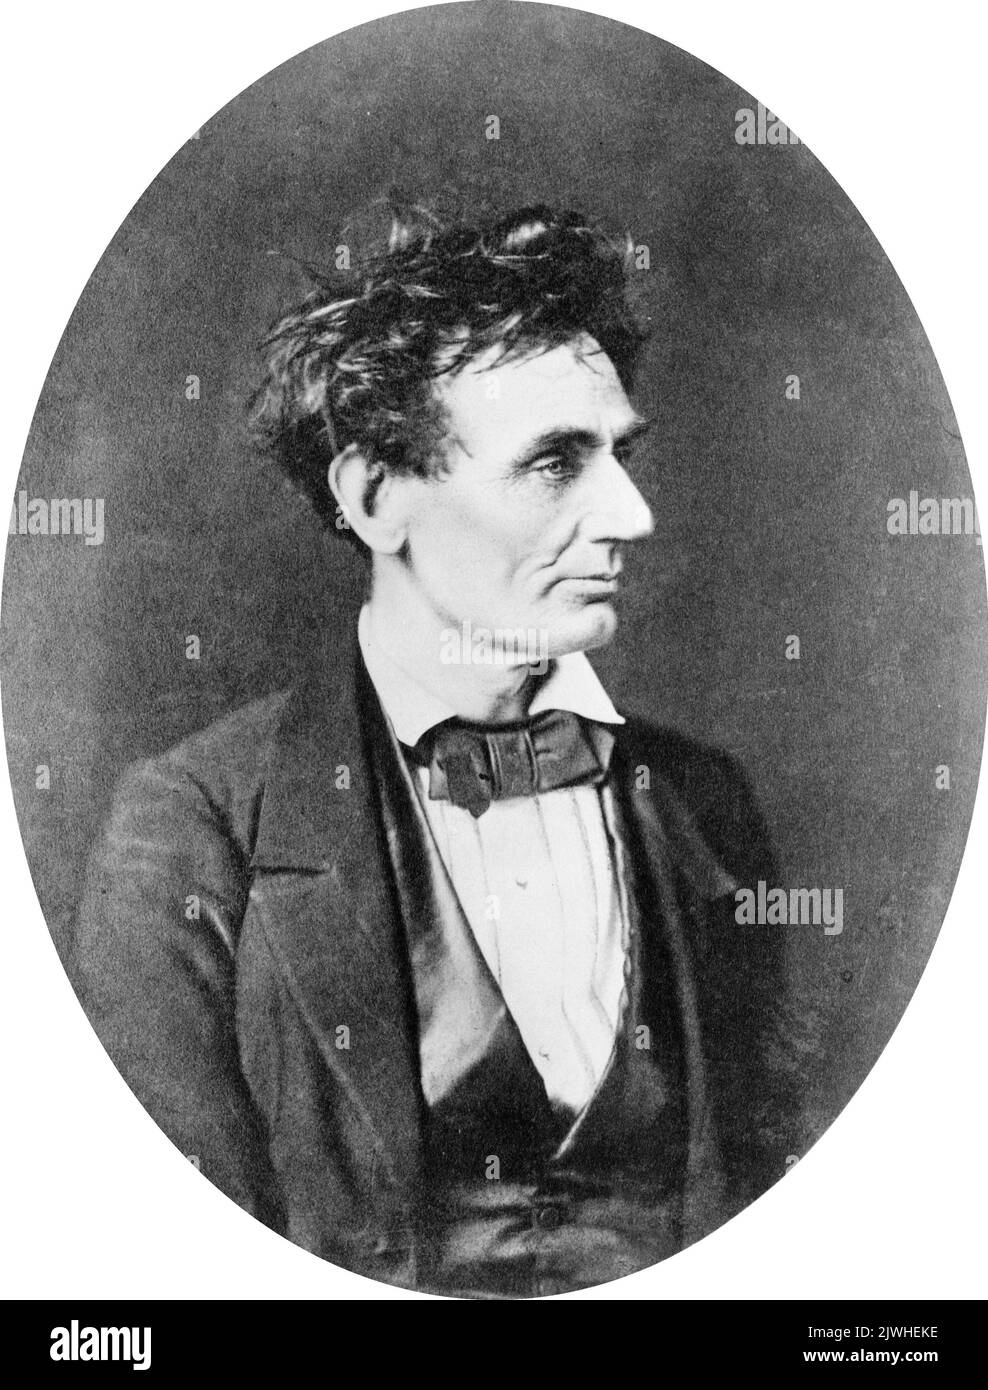 A portrait of Abraham Lincoln taken in 1857 when Lincoln was 48 yrs old. Stock Photo